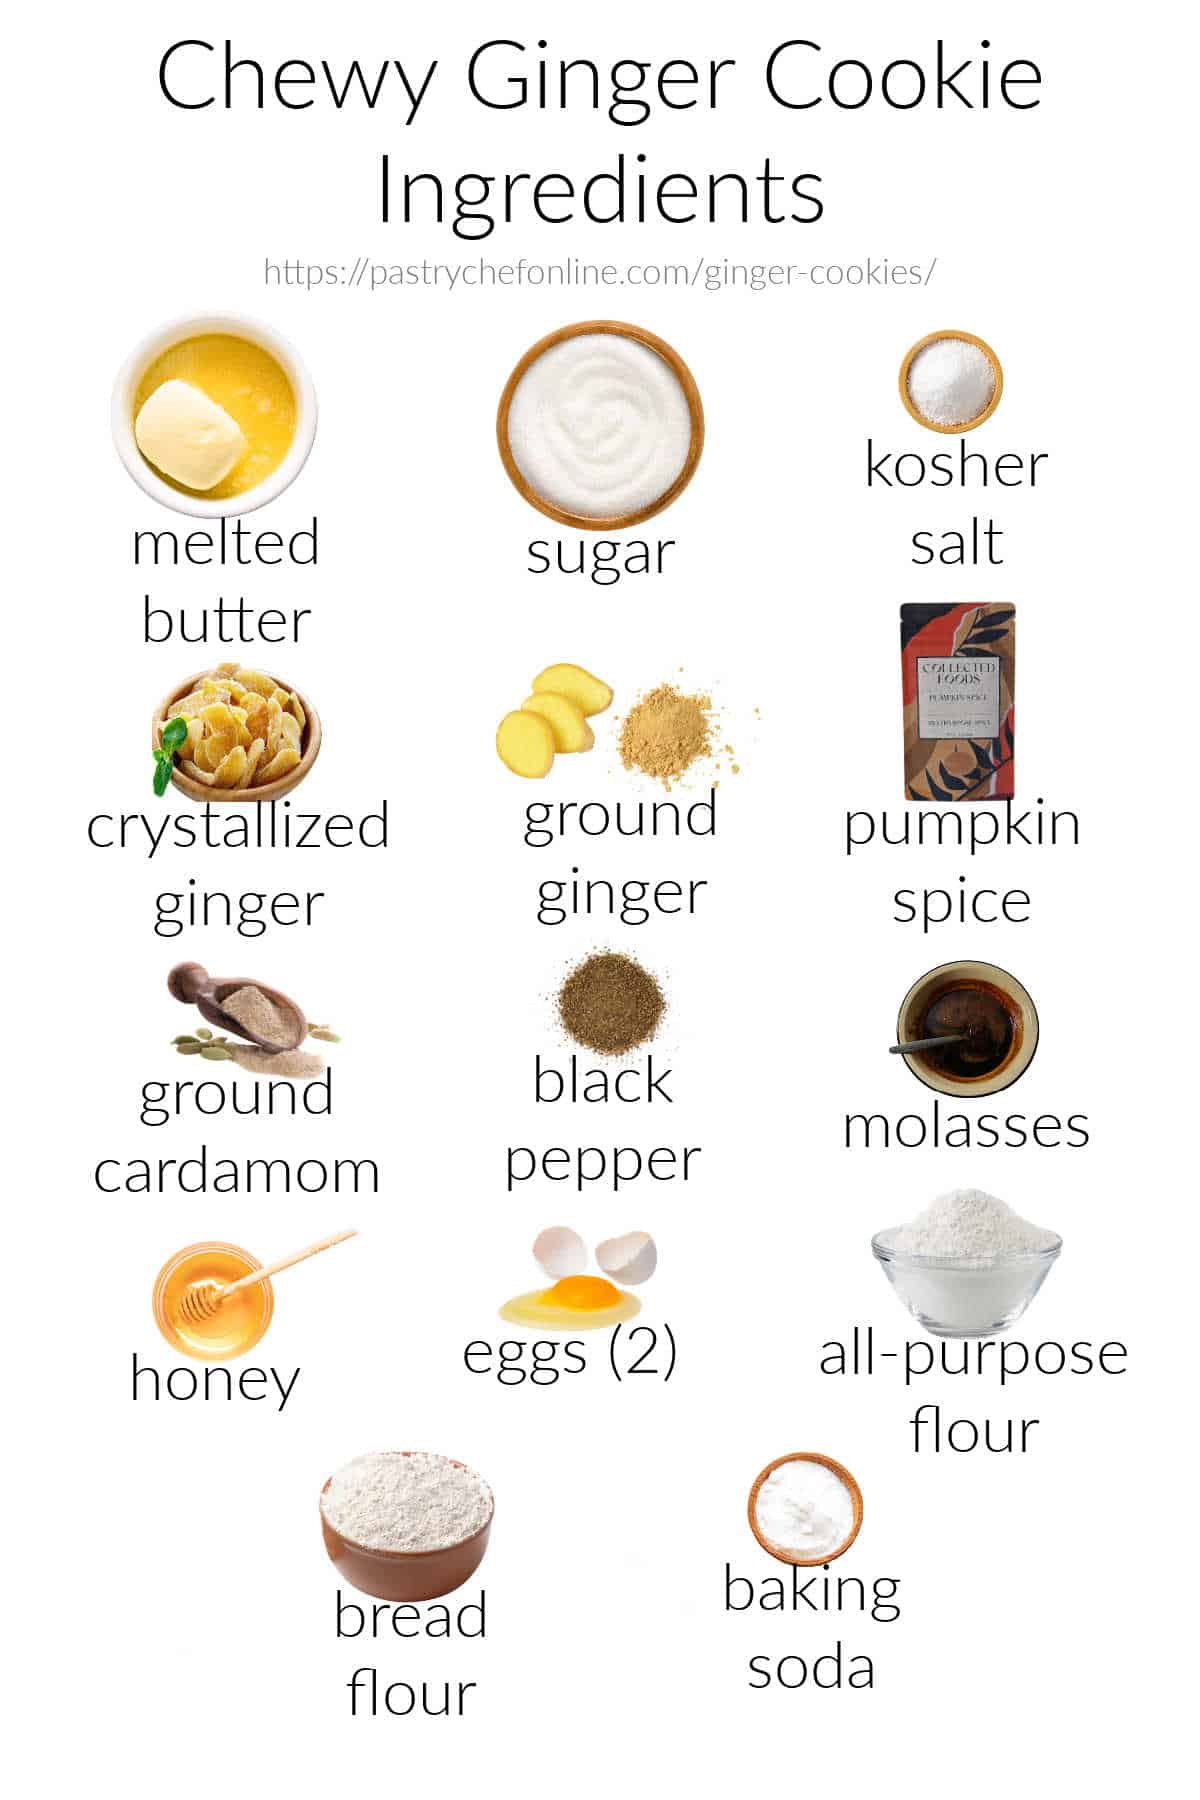 Full-color images of the ingredients needed to make ginger cookies, arranged on a white background and labeled in black, sans serif font. Title text reads, "Chewy ginger cookie ingredients," and the labeled ingredients are melted butter, sugar, kosher salt, crystallized ginger, ground ginger, pumpkin spice, ground cardamom, black pepper, molasses, honey, eggs (2), all-purpose flour, bread flour, and baking soda.